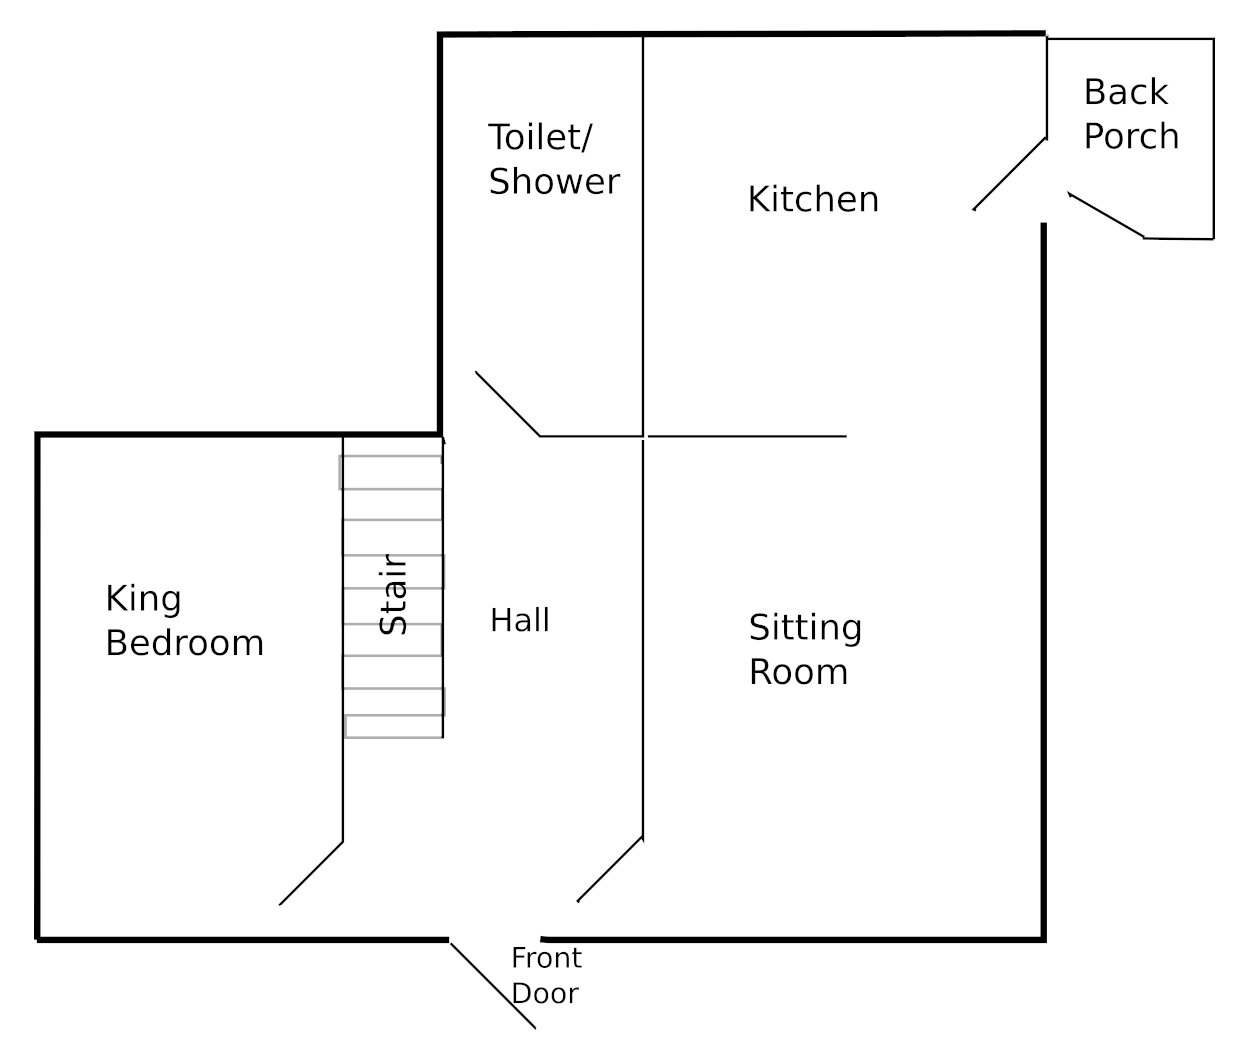 Ground floor - Floor plan of the house showing the approximate ground floor layout